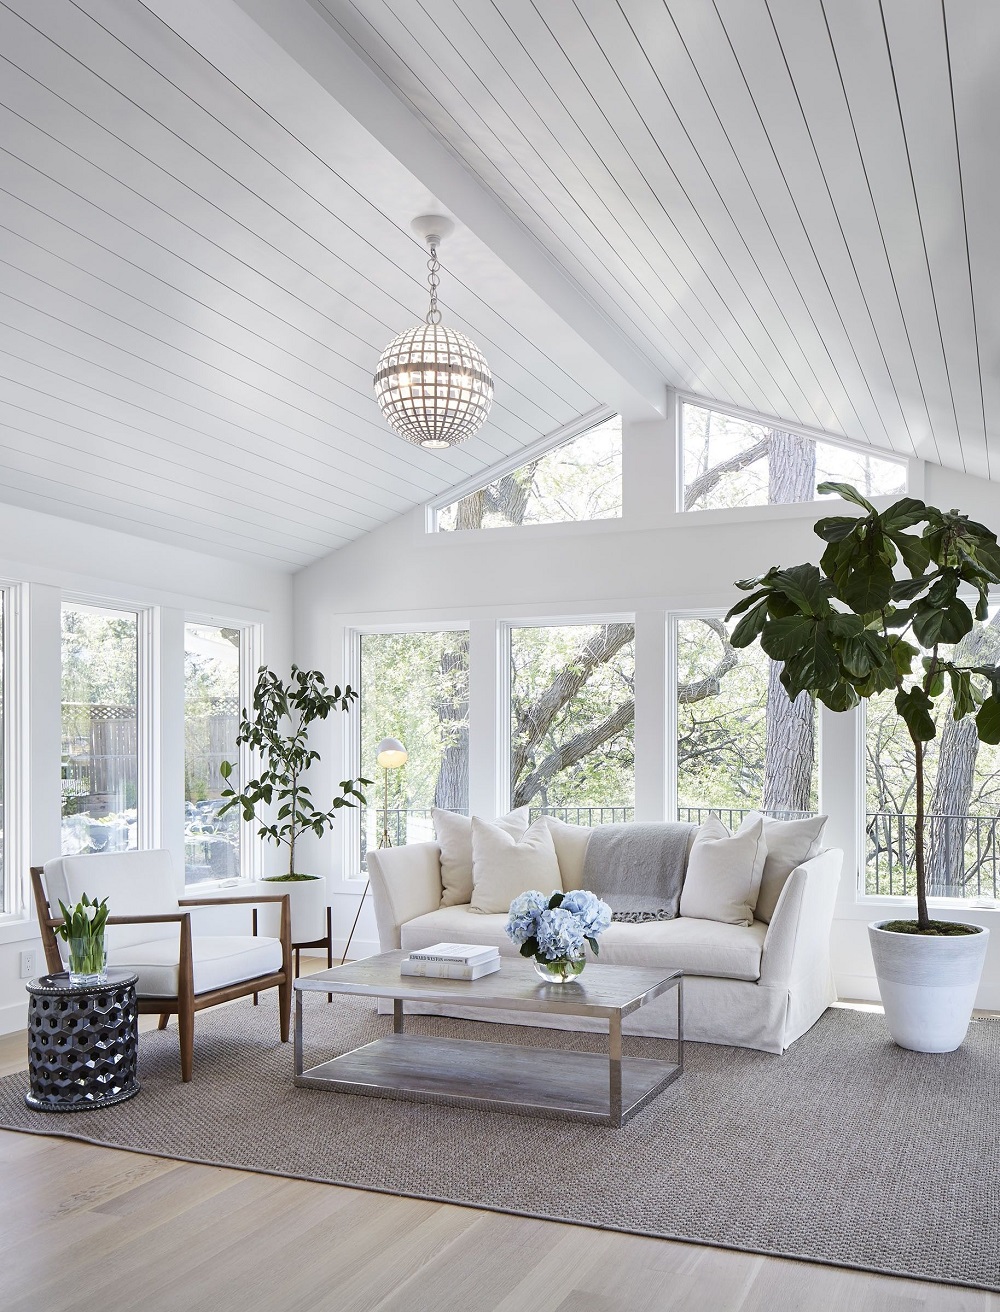 sr2 Cool screened in porch & sunroom ideas to try at your house